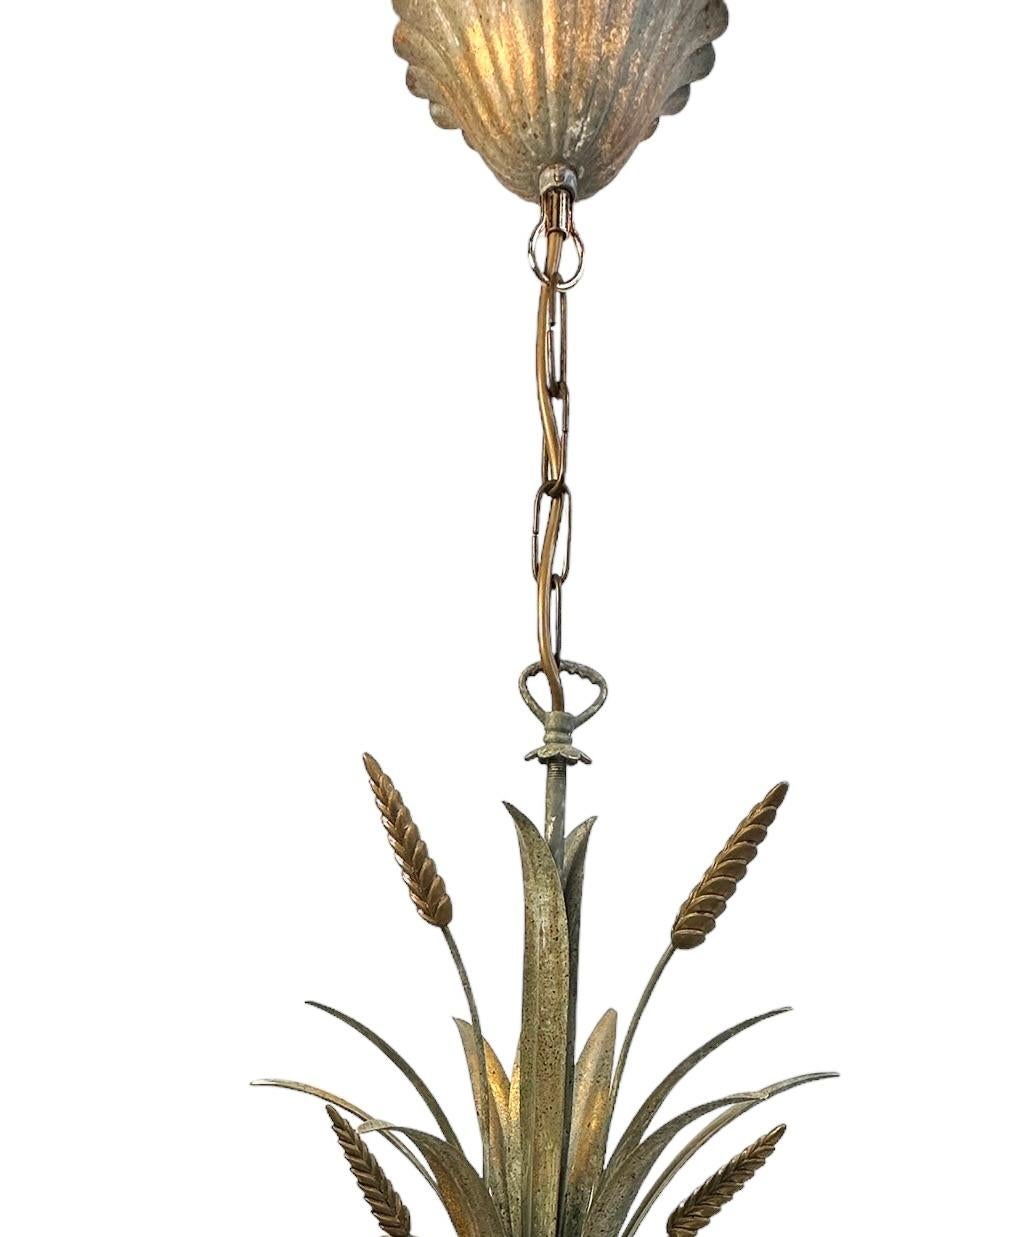 Metal & Glass Shade Wheat Sheaf Chandelier Tole Toleware Coco Chanel Style For Sale 9